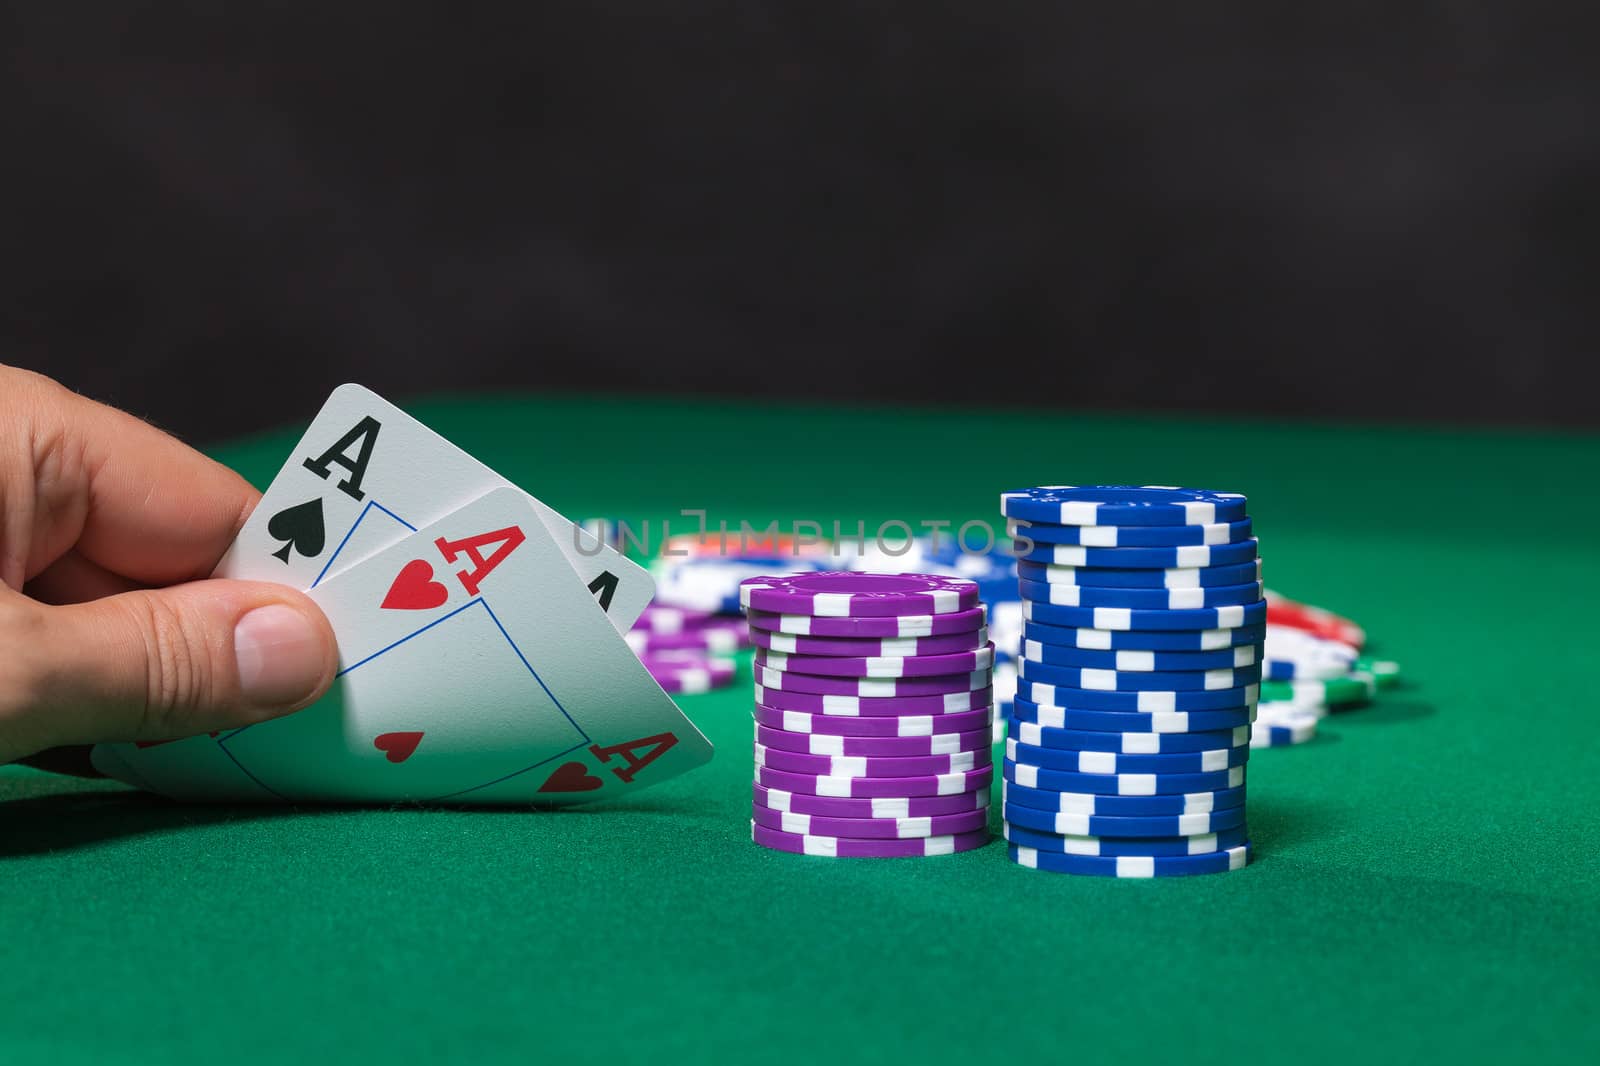 Colorful poker chips and two Ace closeup on green cloth